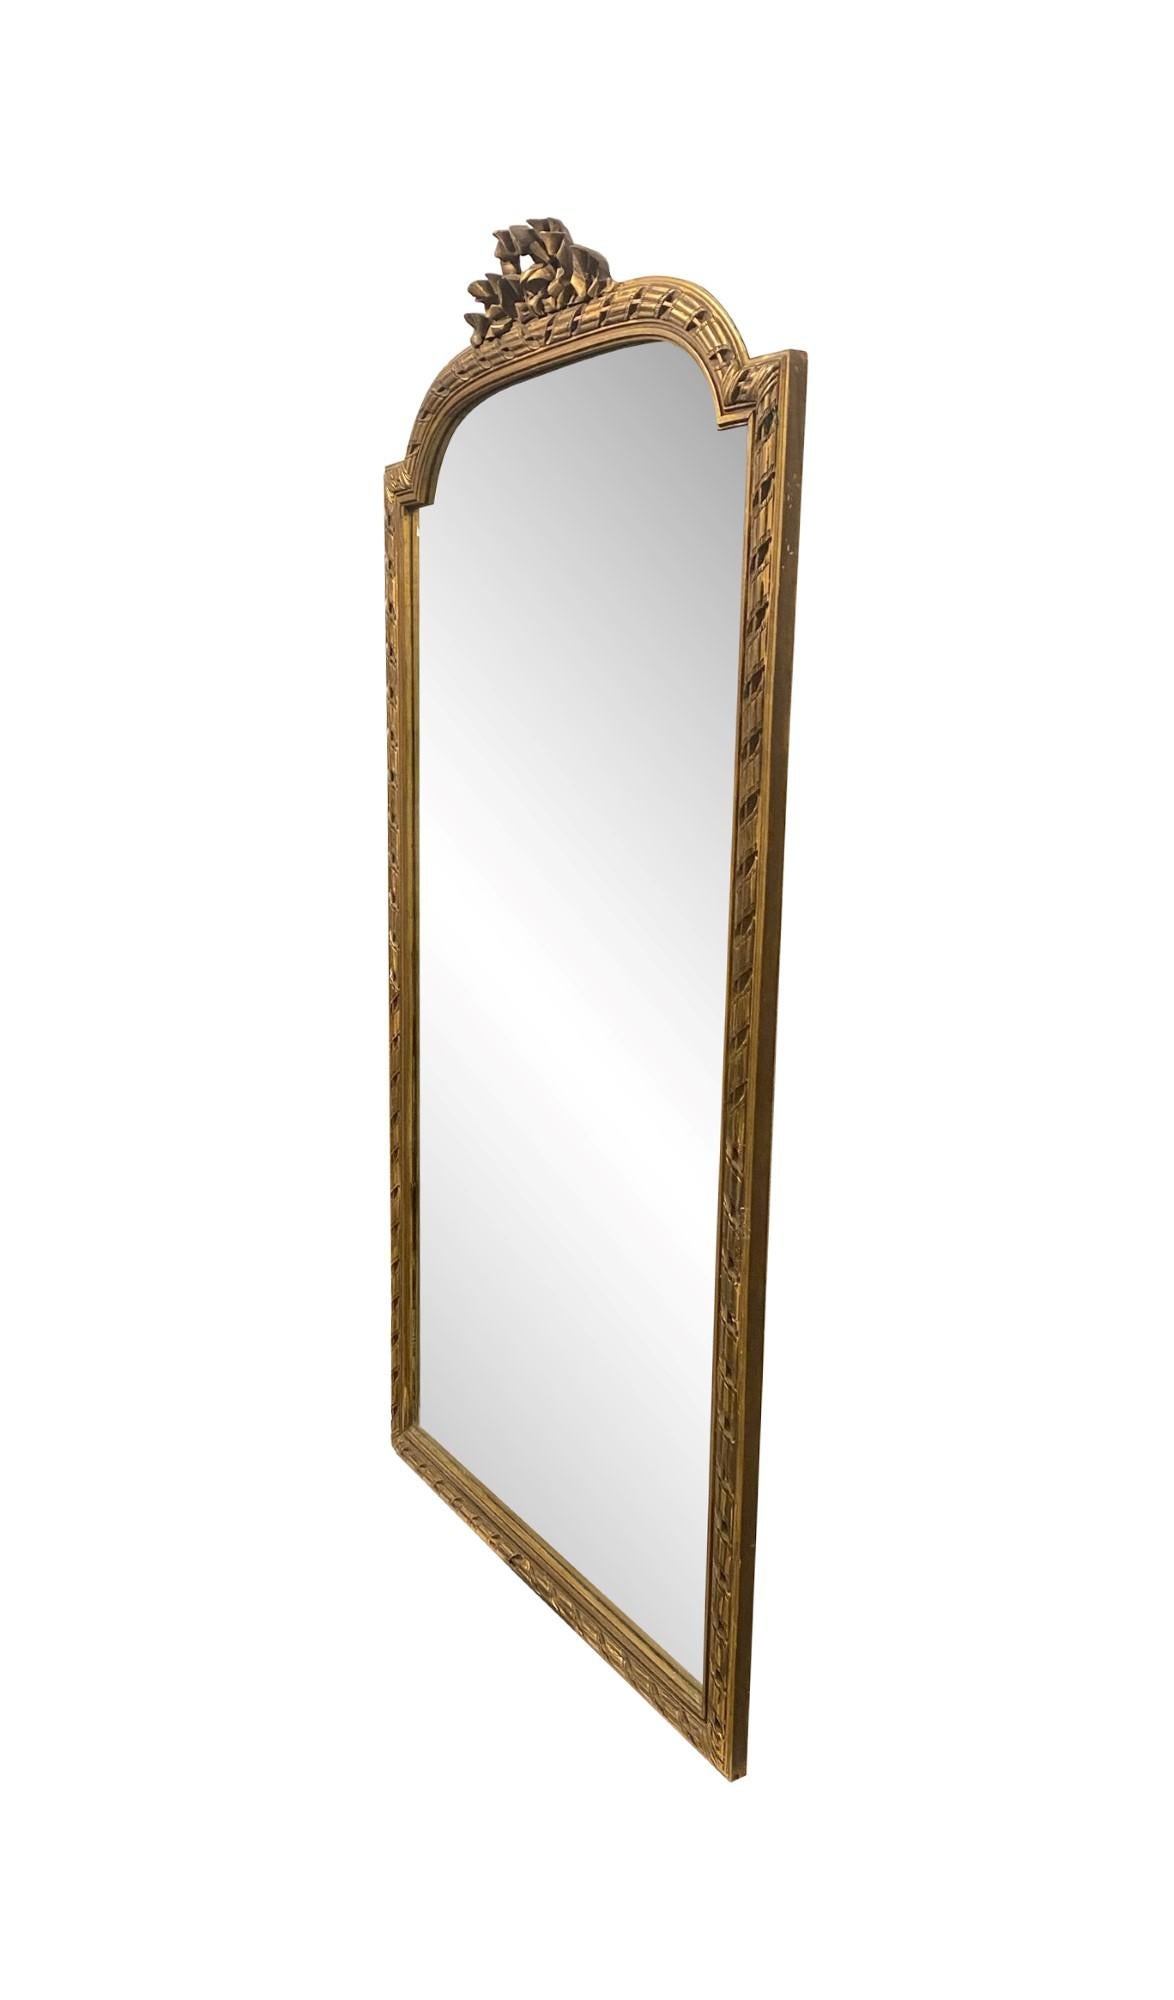 Early 20th C. Gilted Wood Mirror Louis XVI Style from France, Over Mantel 2